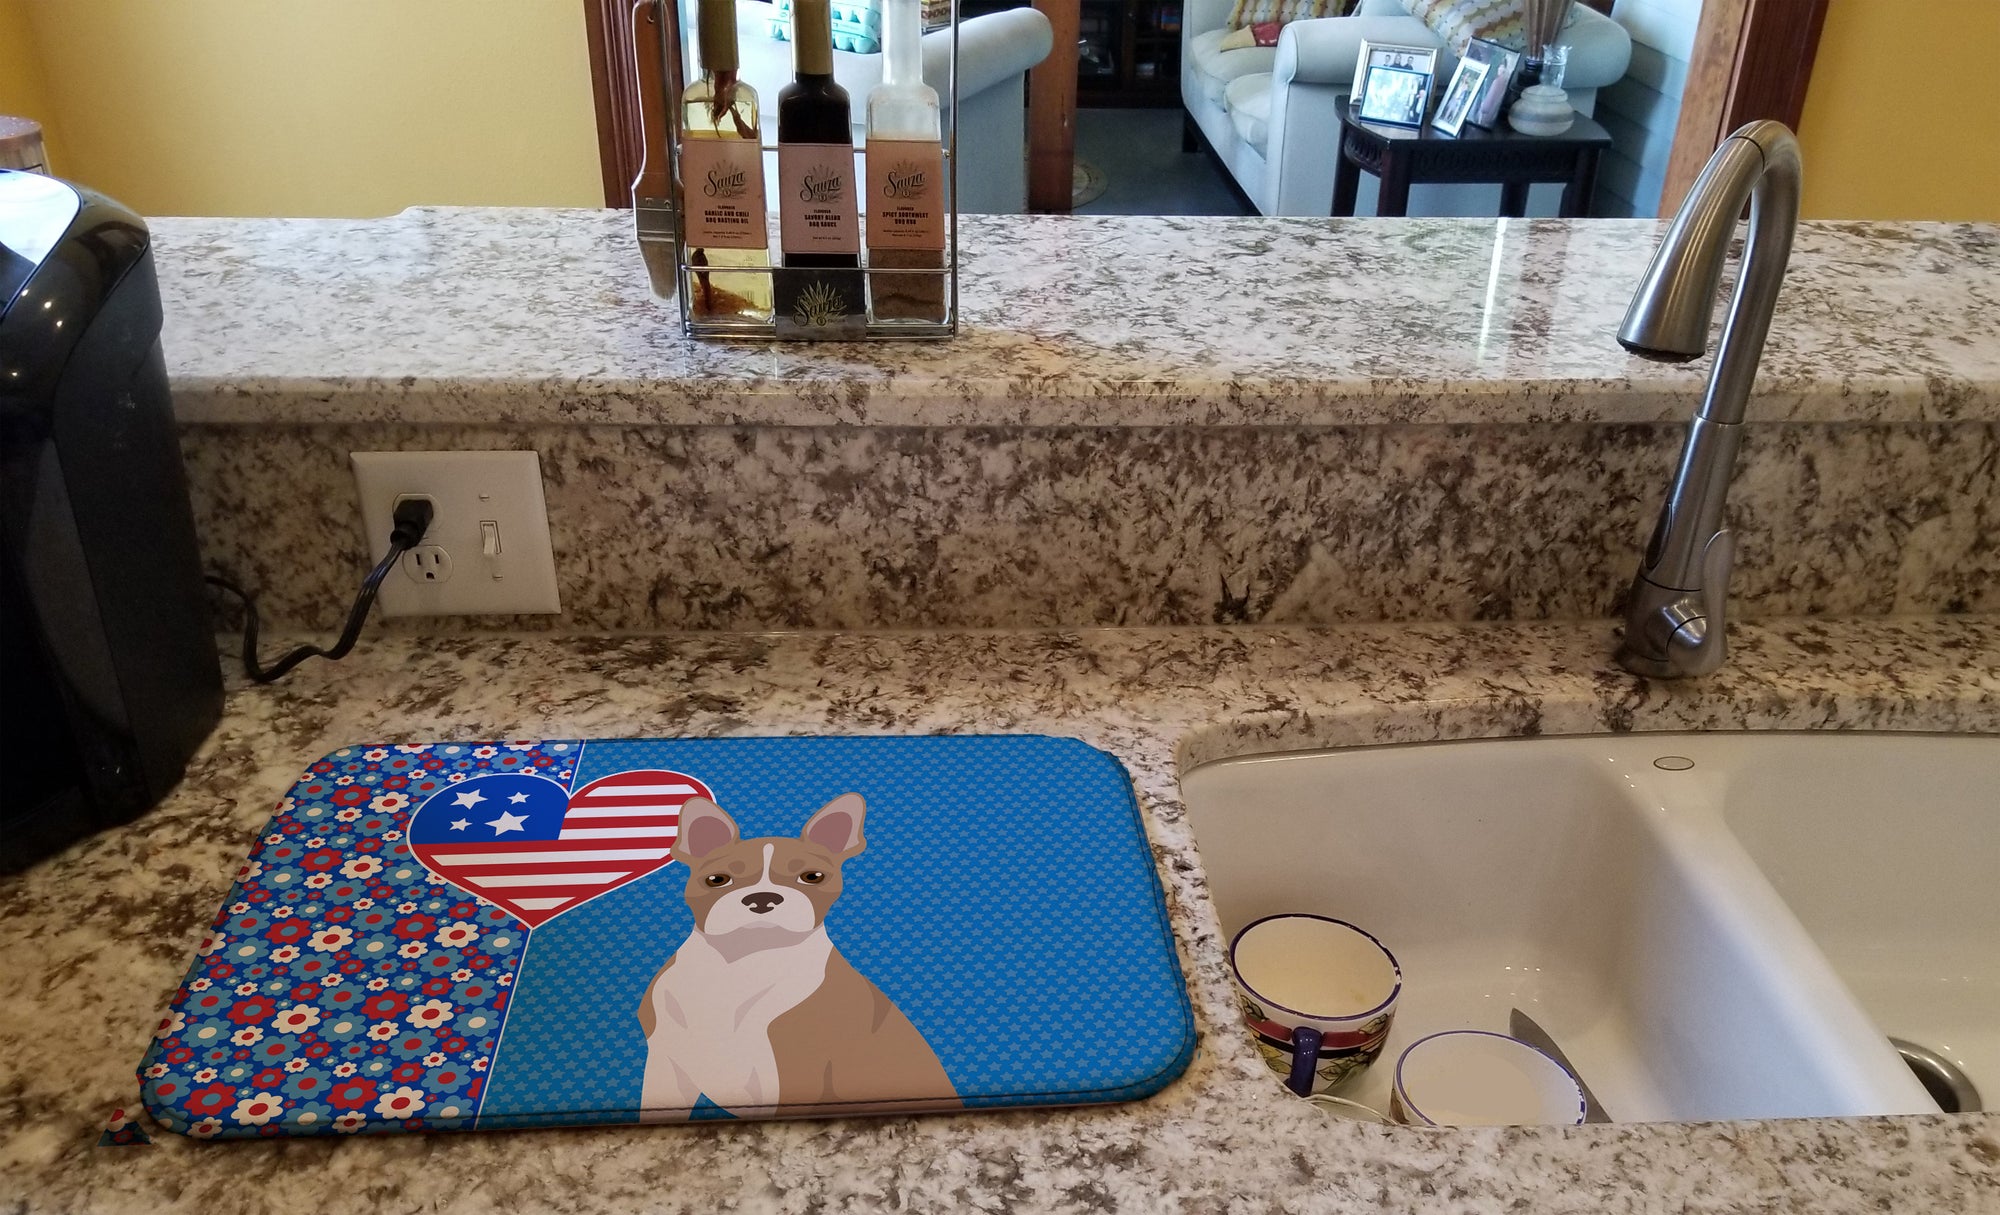 Fawn Boston Terrier USA American Dish Drying Mat  the-store.com.